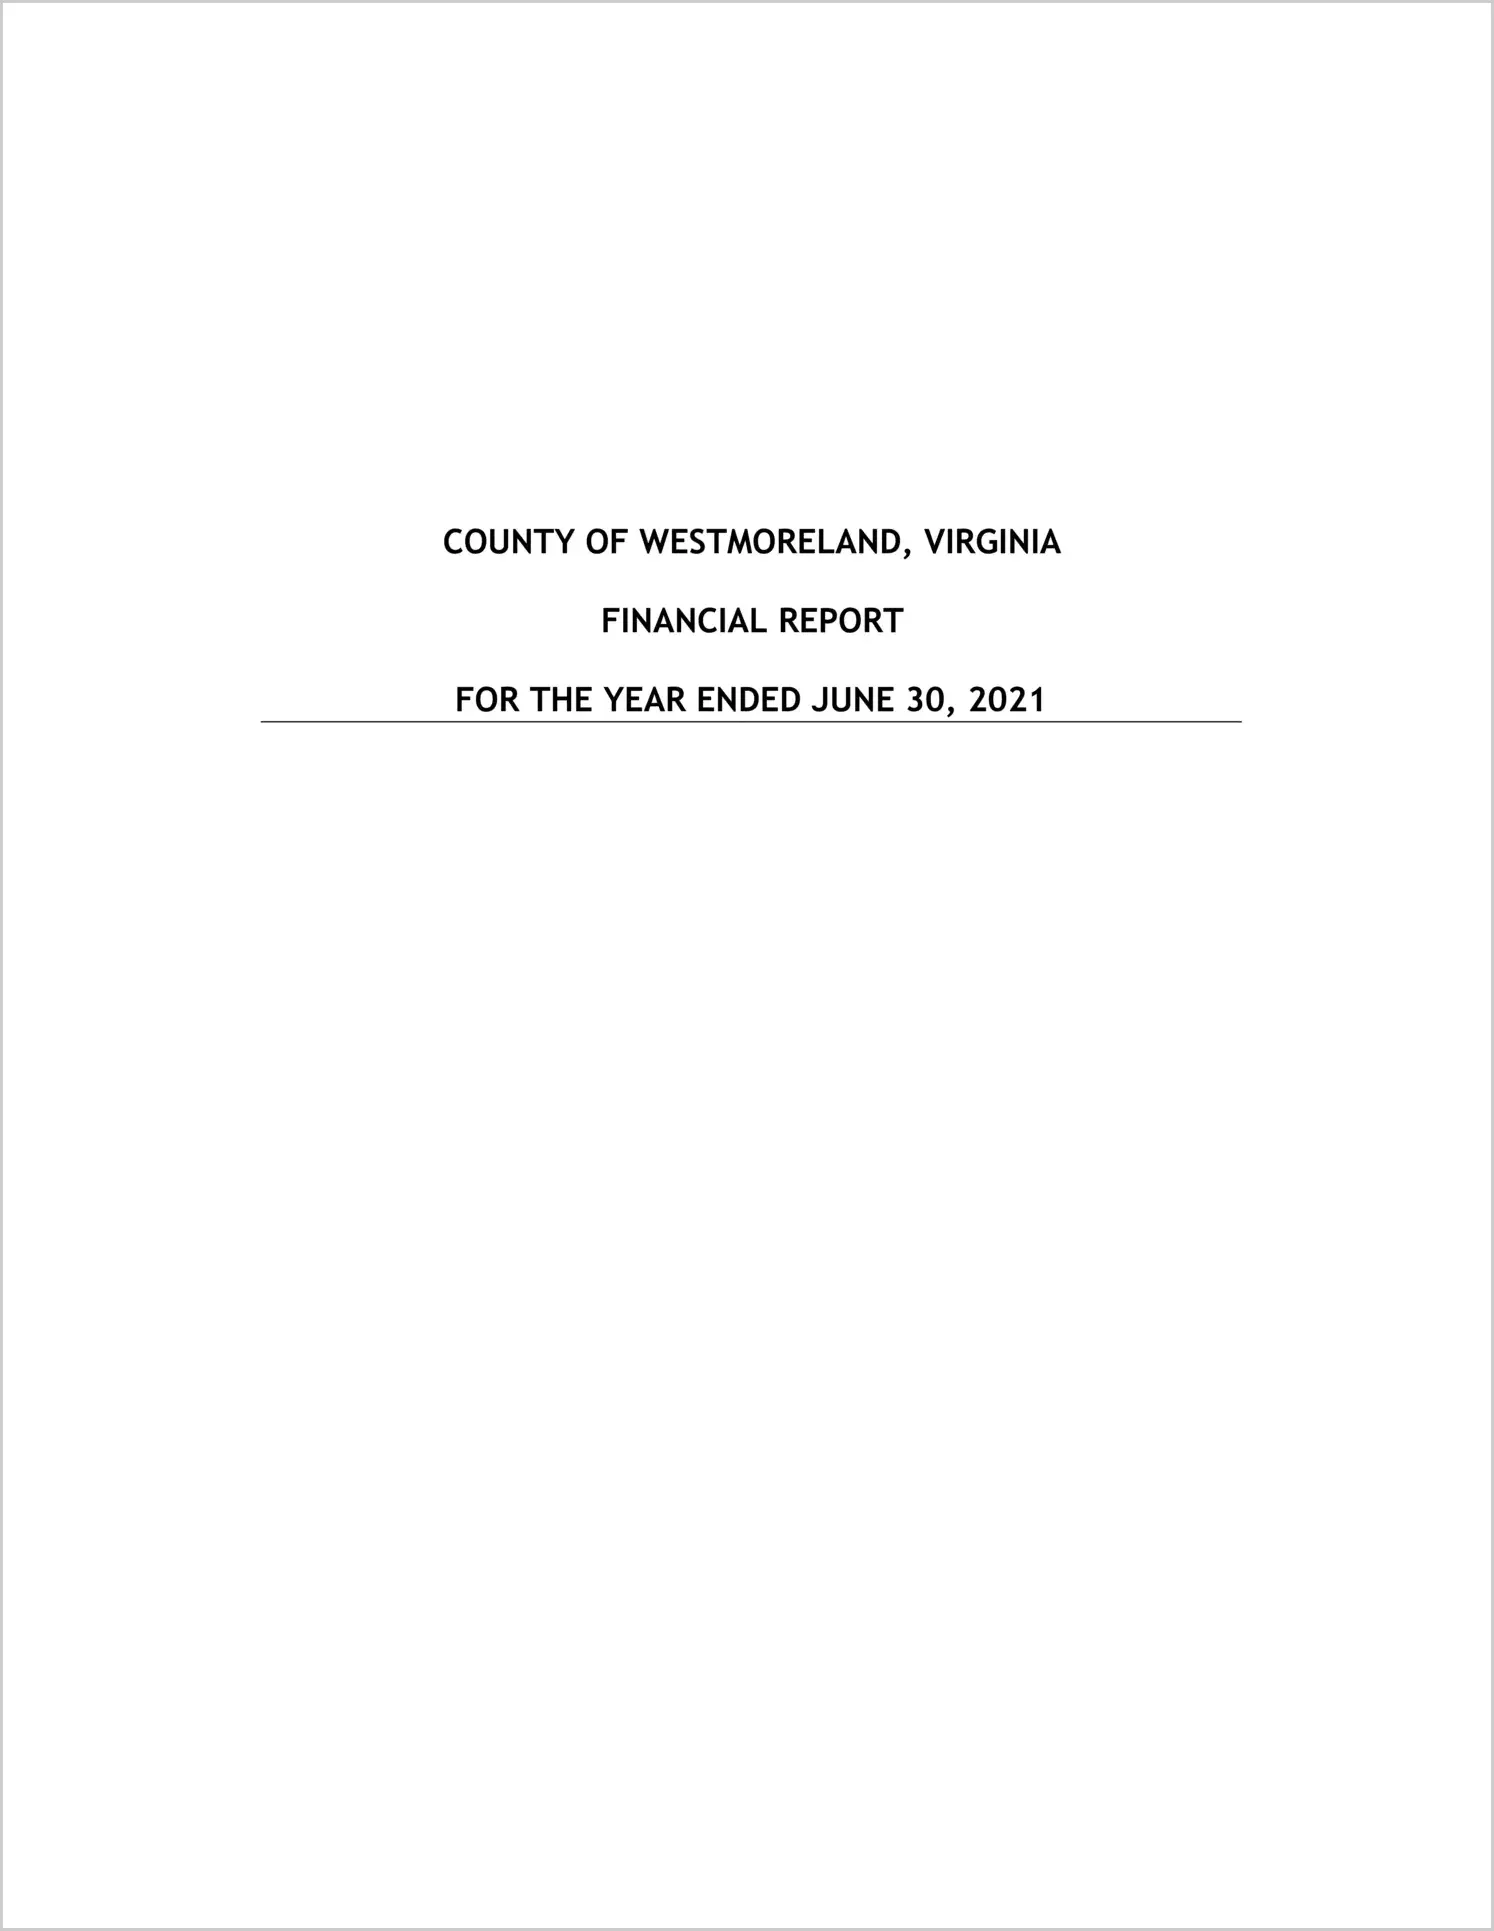 2021 Annual Financial Report for County of Westmoreland